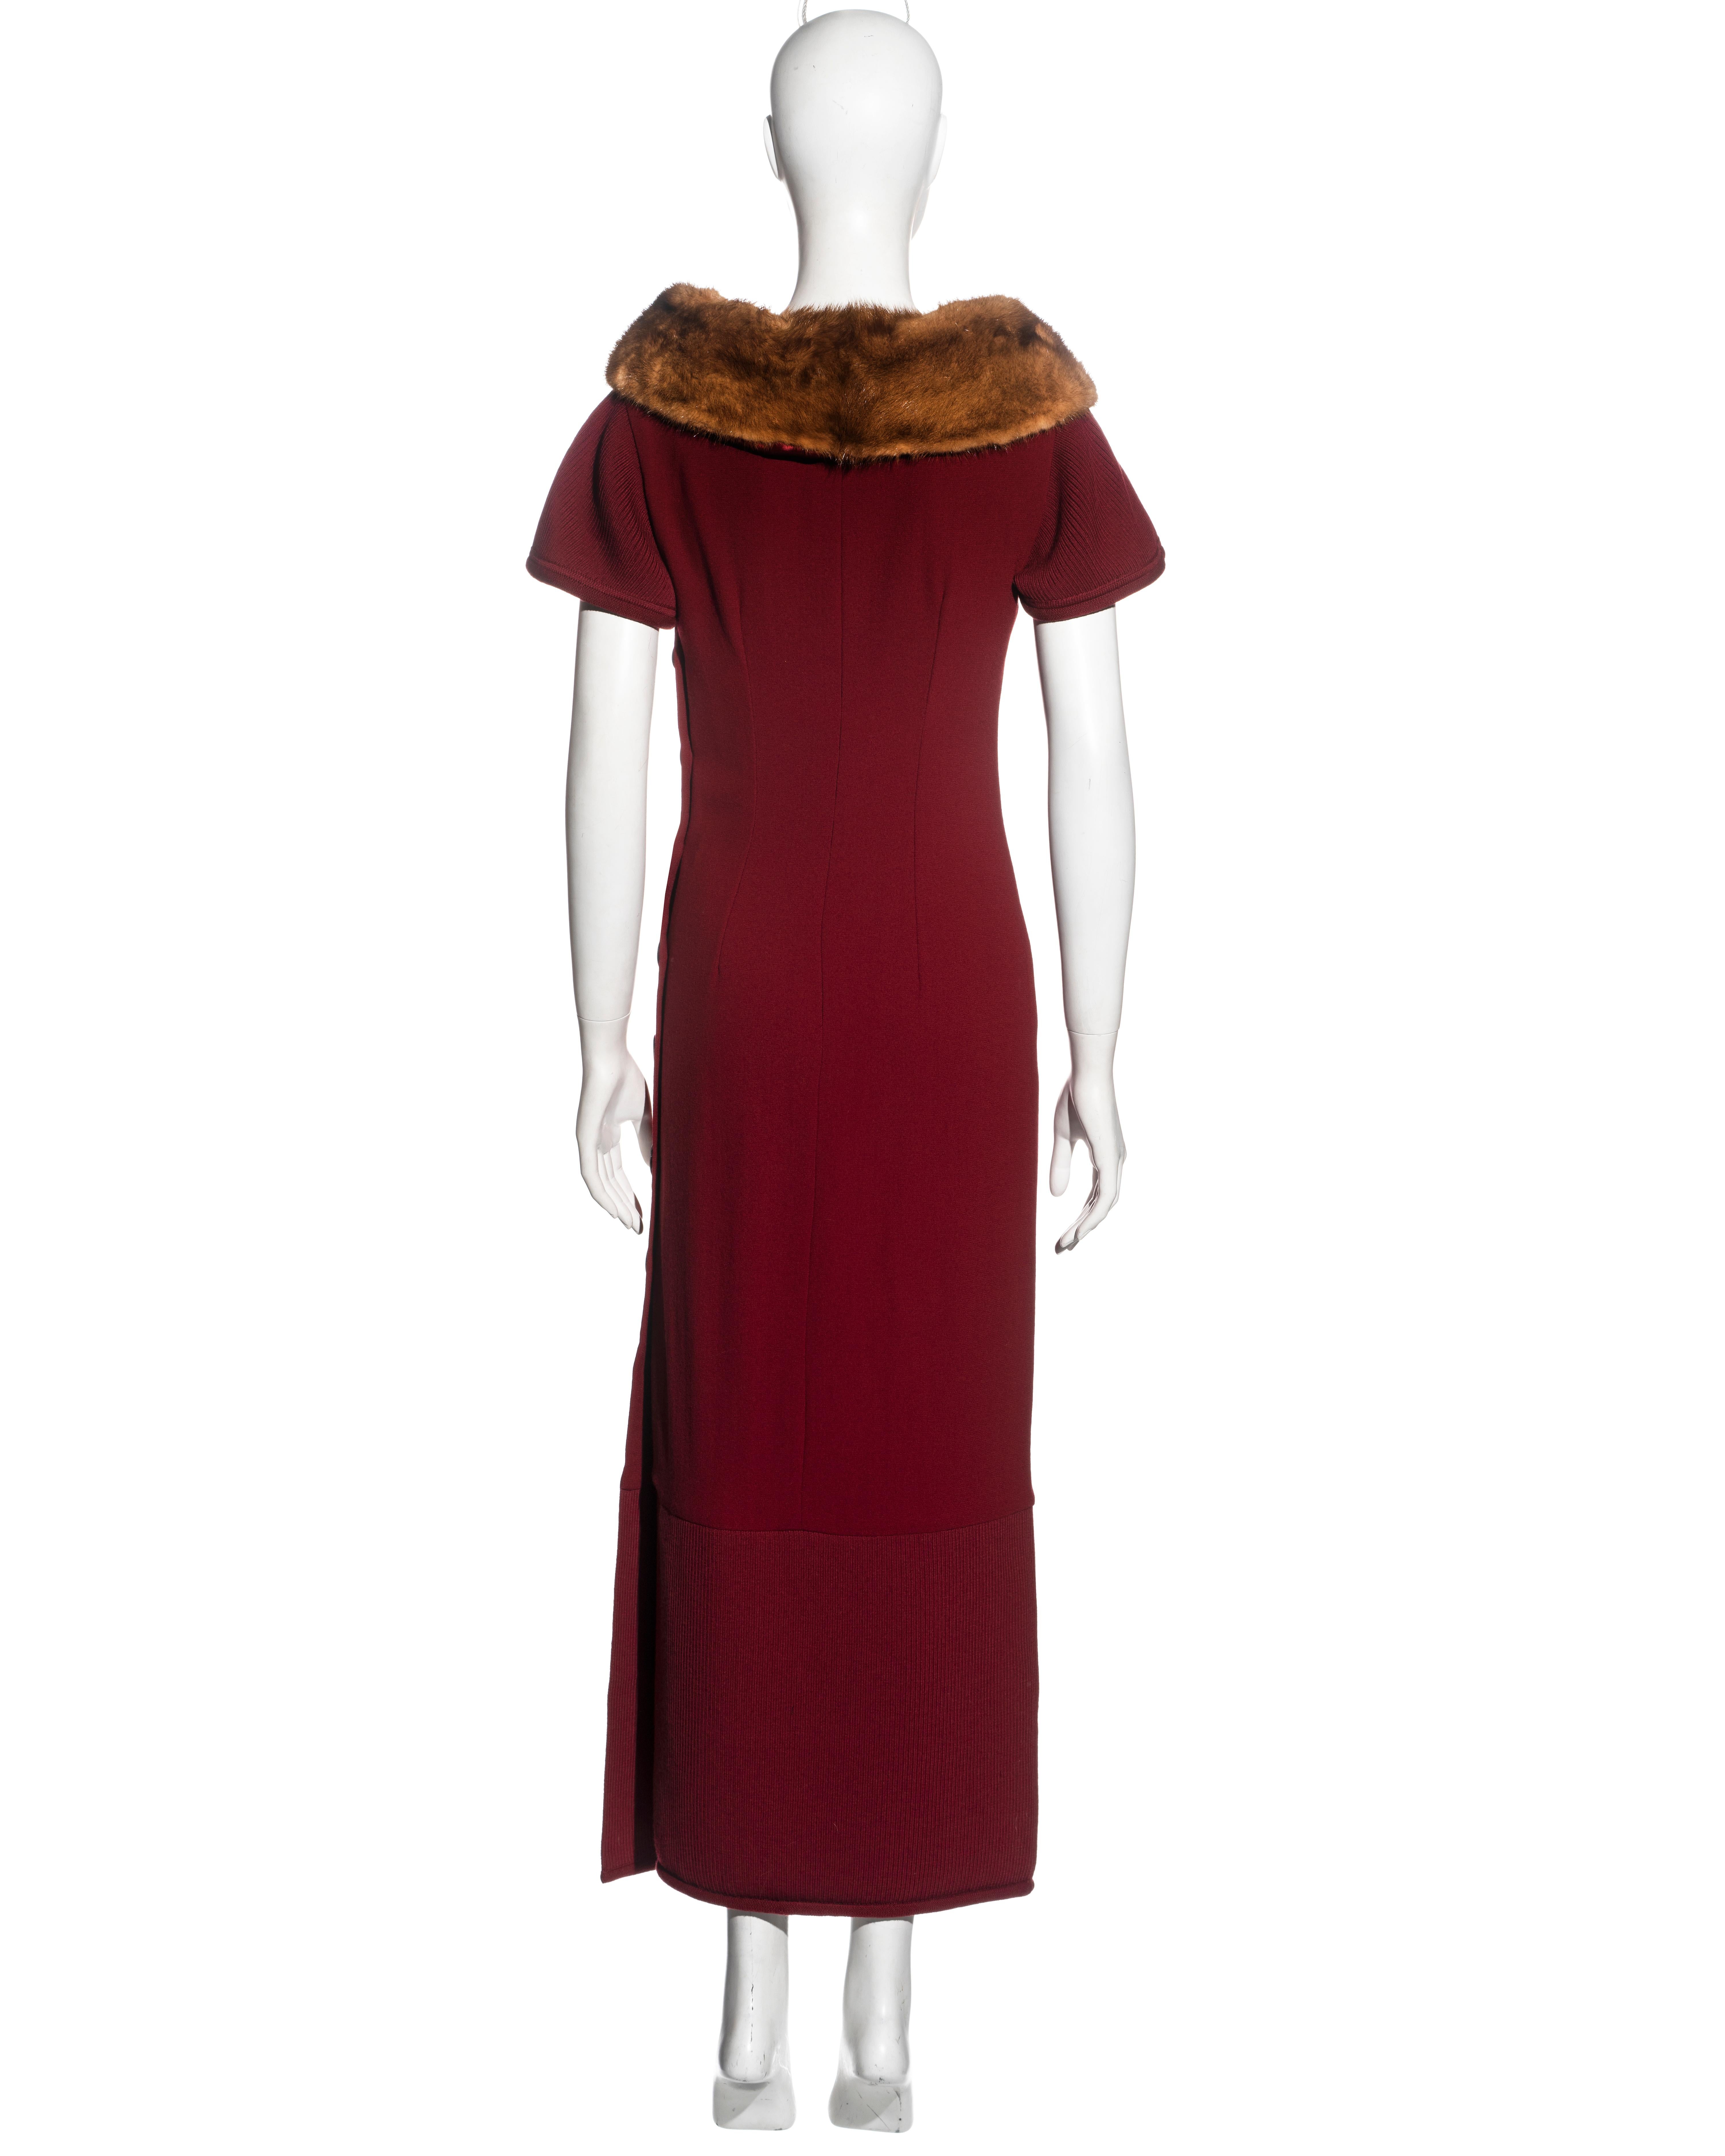 Christian Dior by John Galliano red wool crepe dress with mink fur trim, fw 1999 For Sale 3